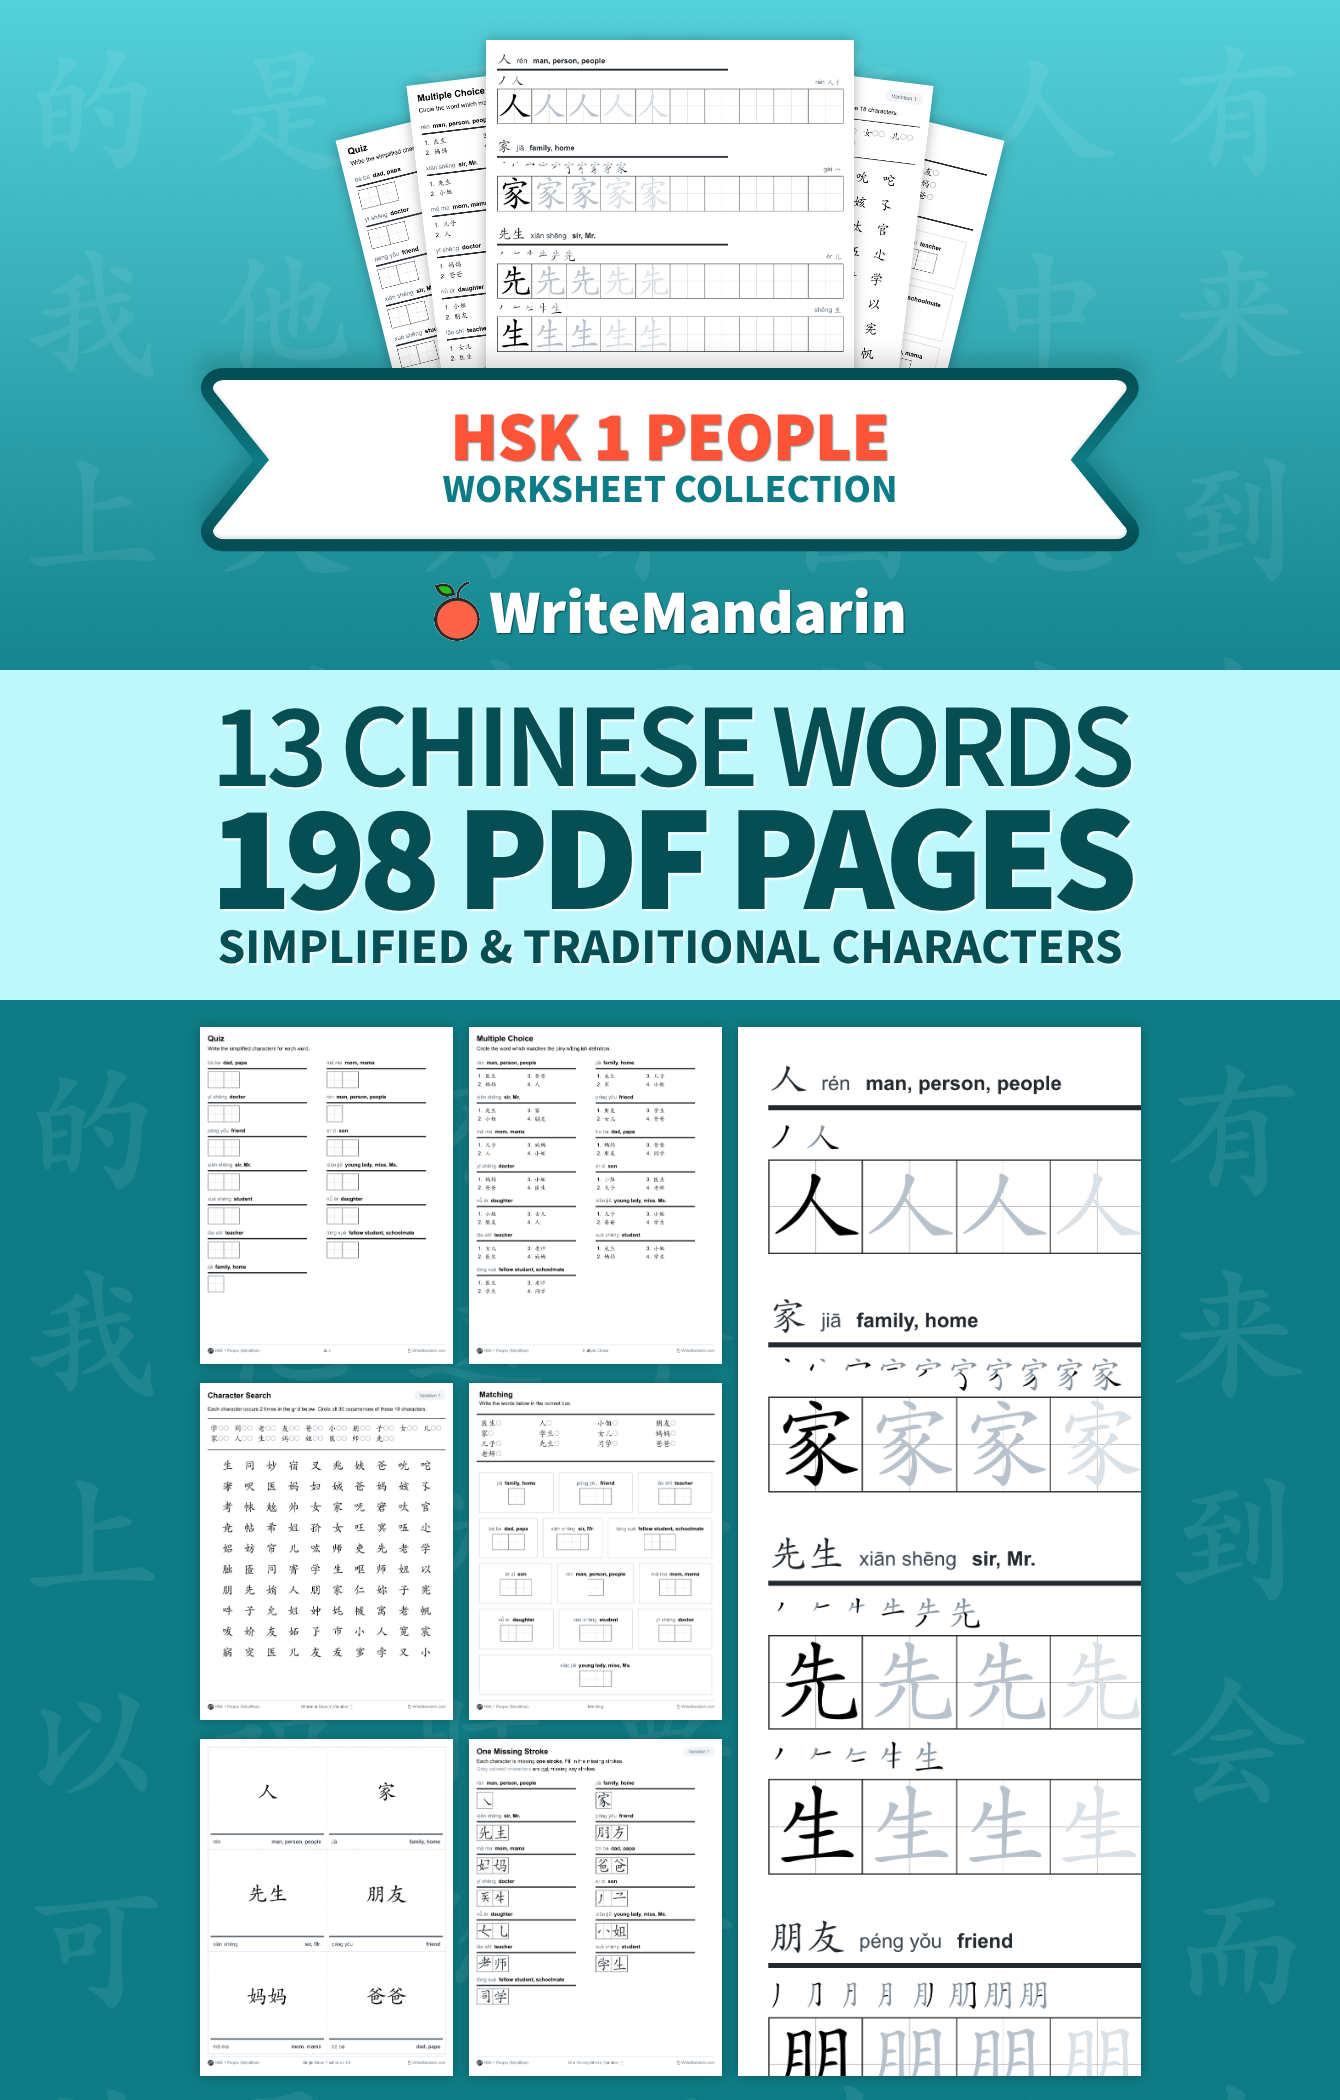 Preview image of HSK 1 People worksheet collection